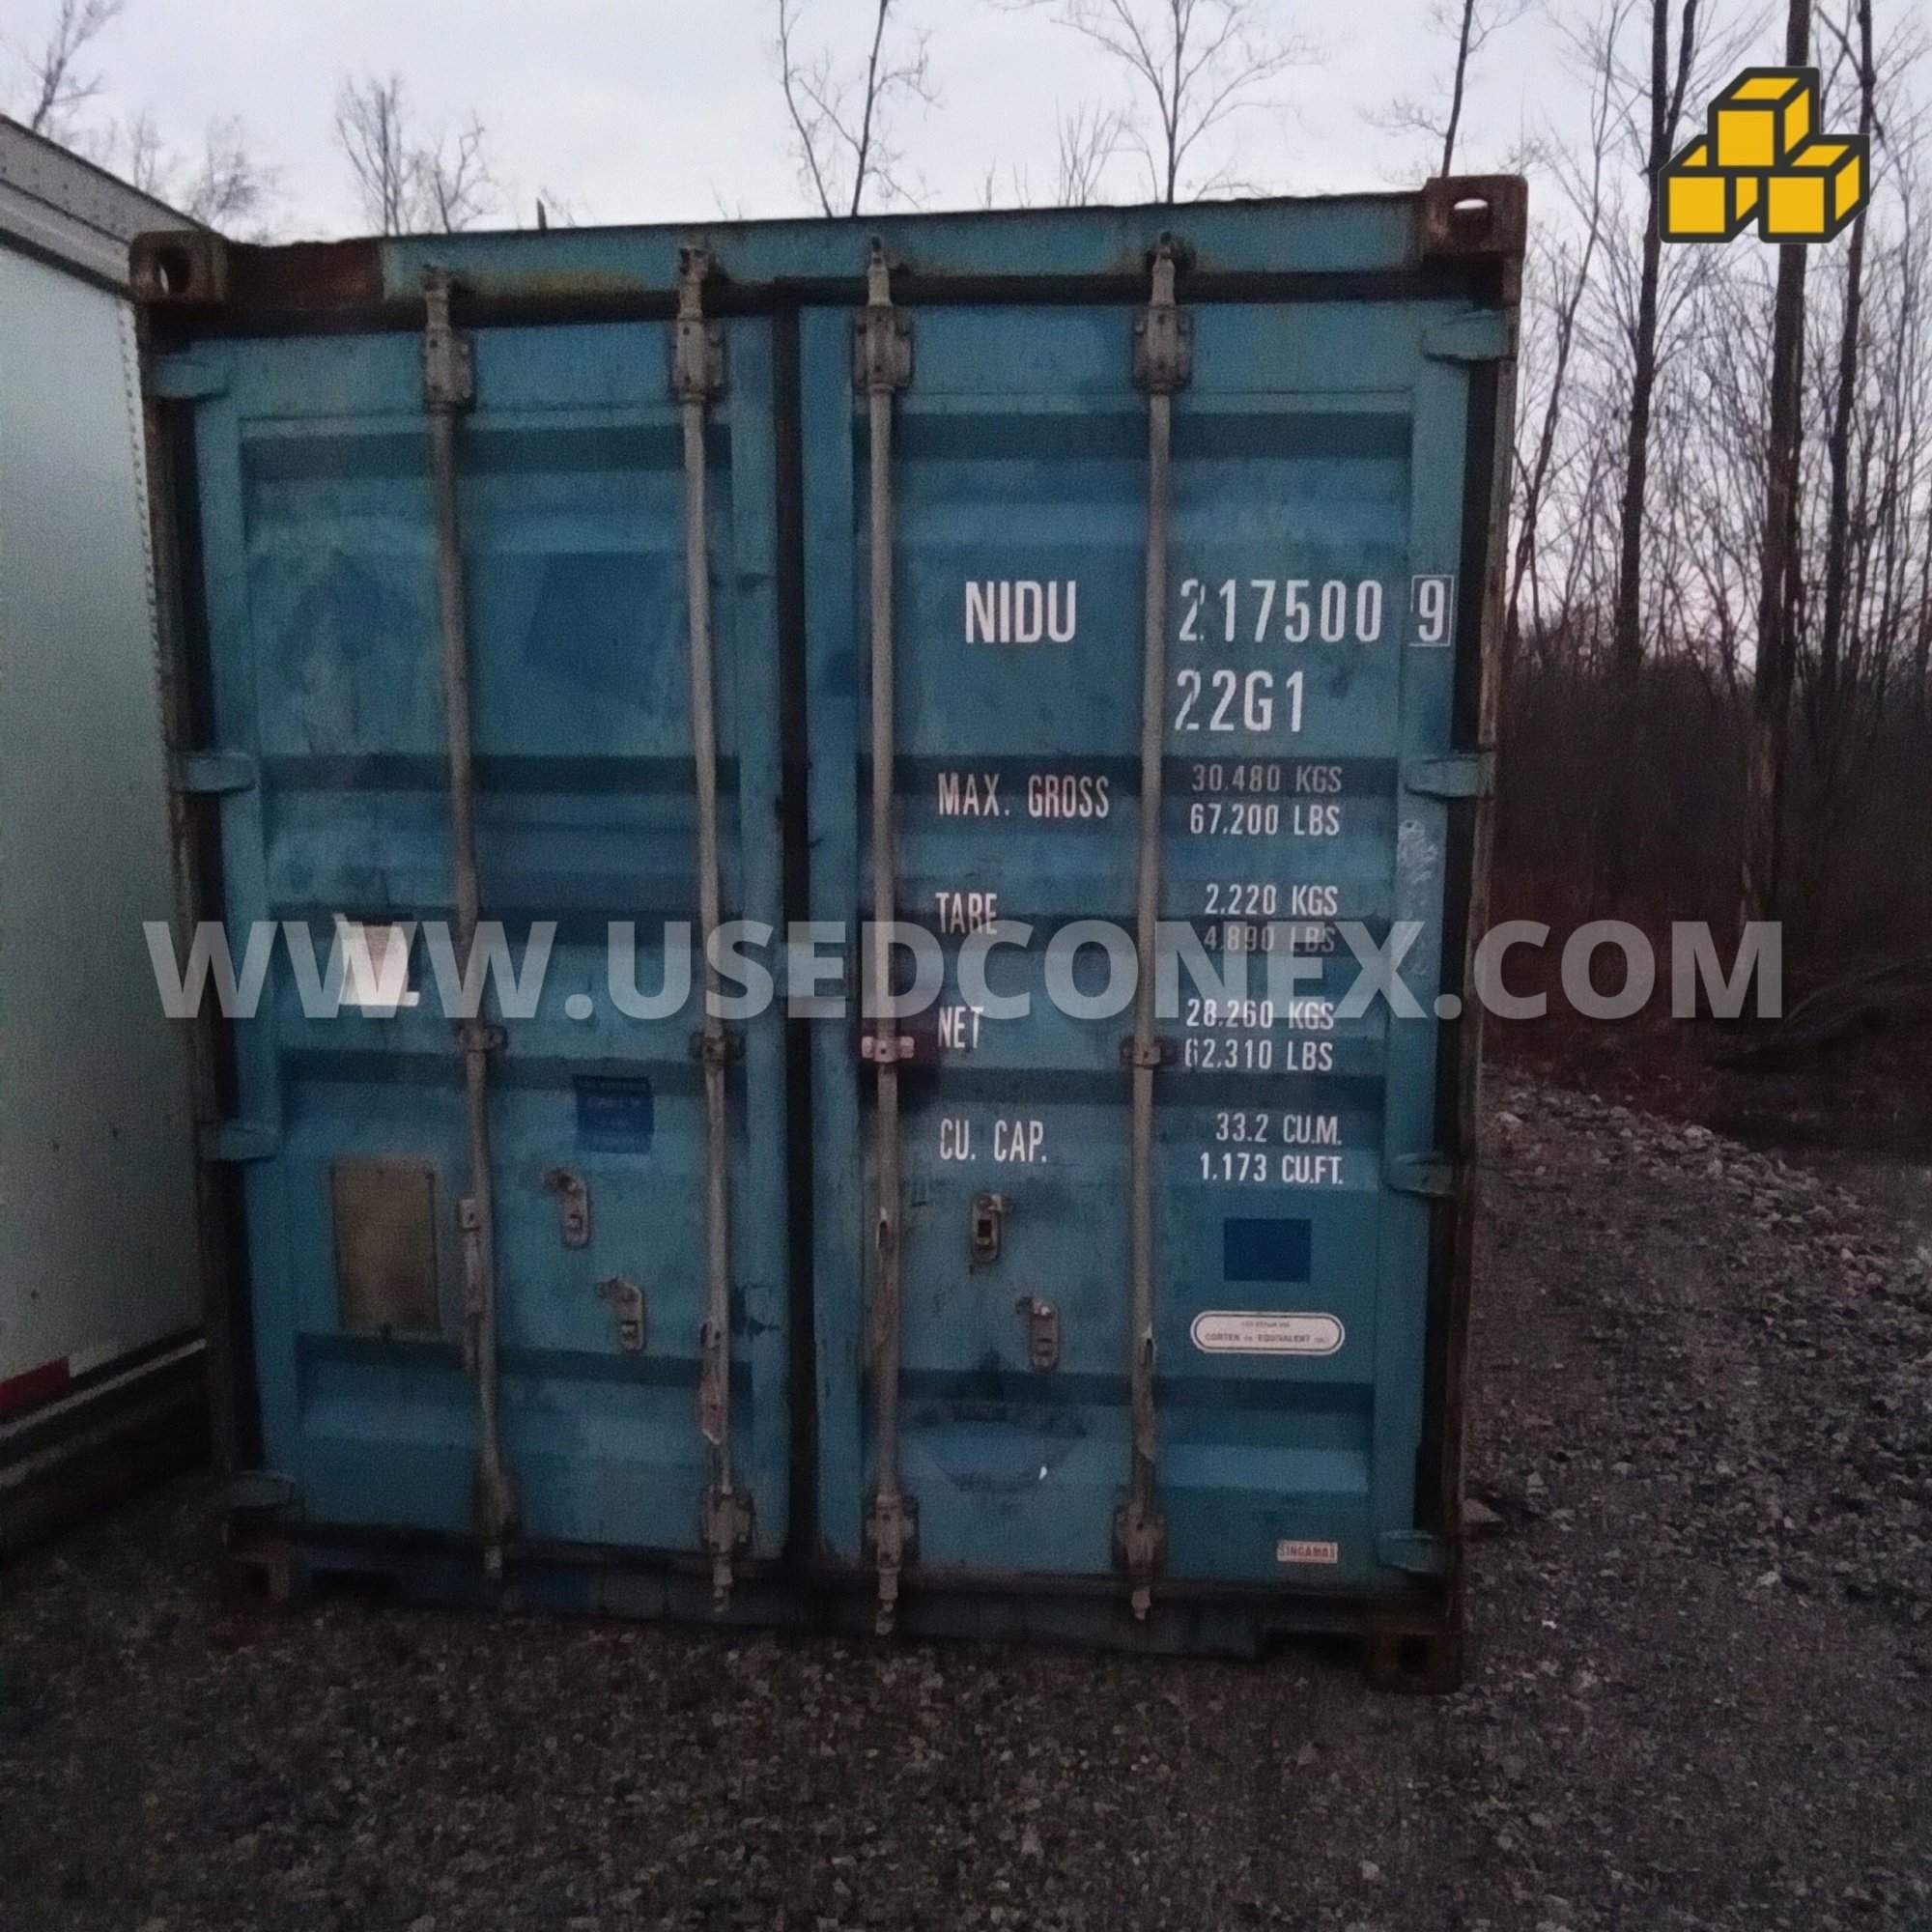 SHIPPING CONTAINERS FOR SALE IN MODESTO CA